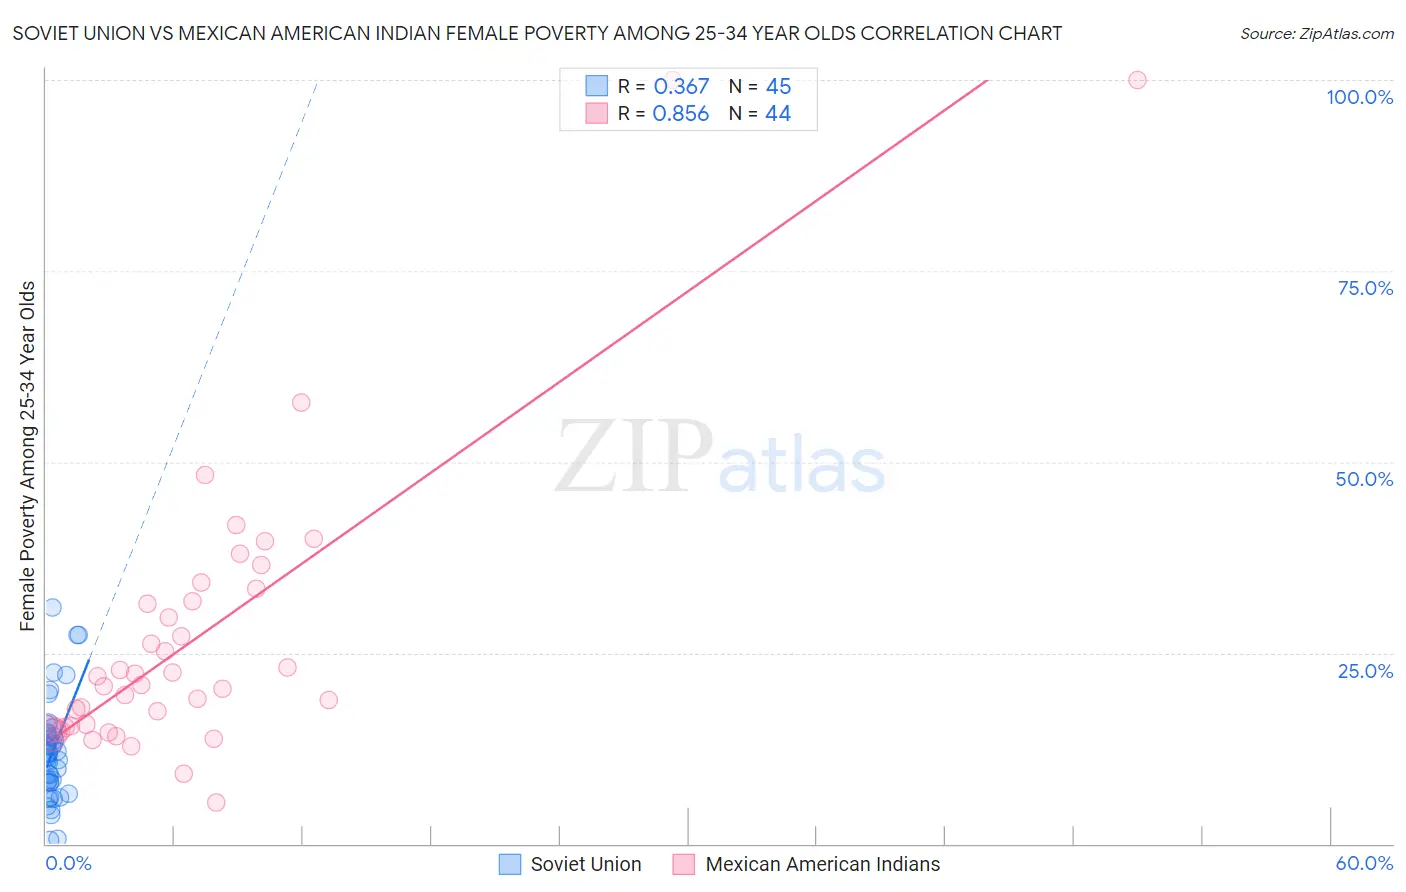 Soviet Union vs Mexican American Indian Female Poverty Among 25-34 Year Olds